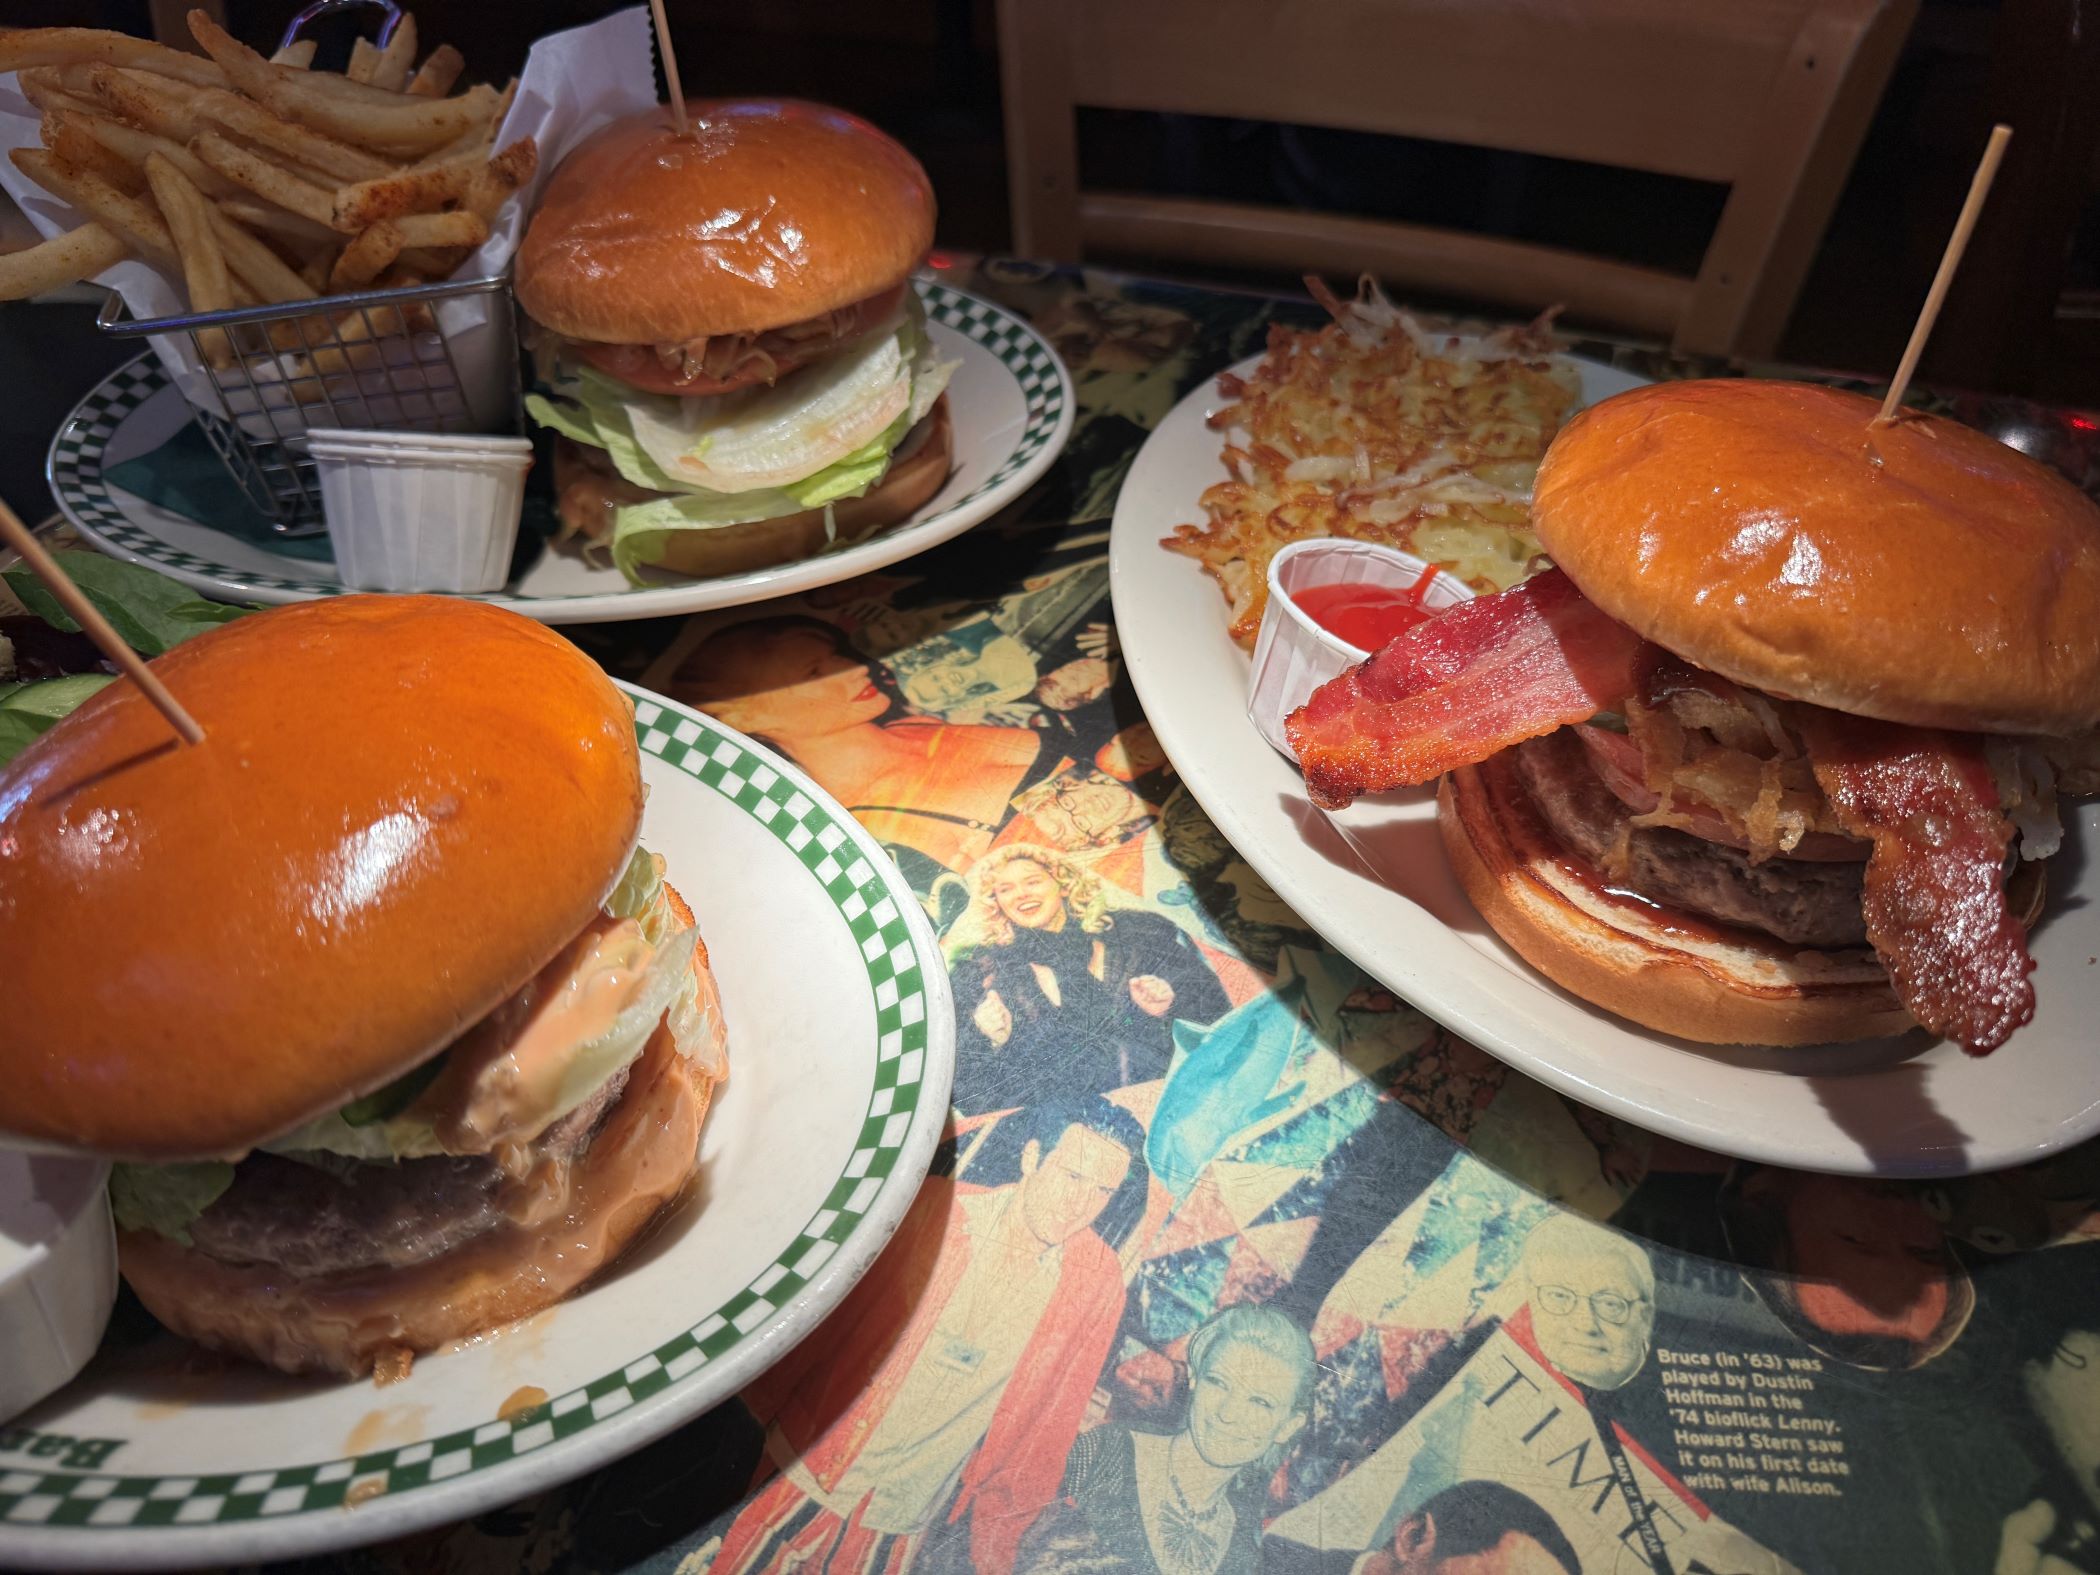 An image of the three Juicy Lucy Burgers at Barney's Beanery.